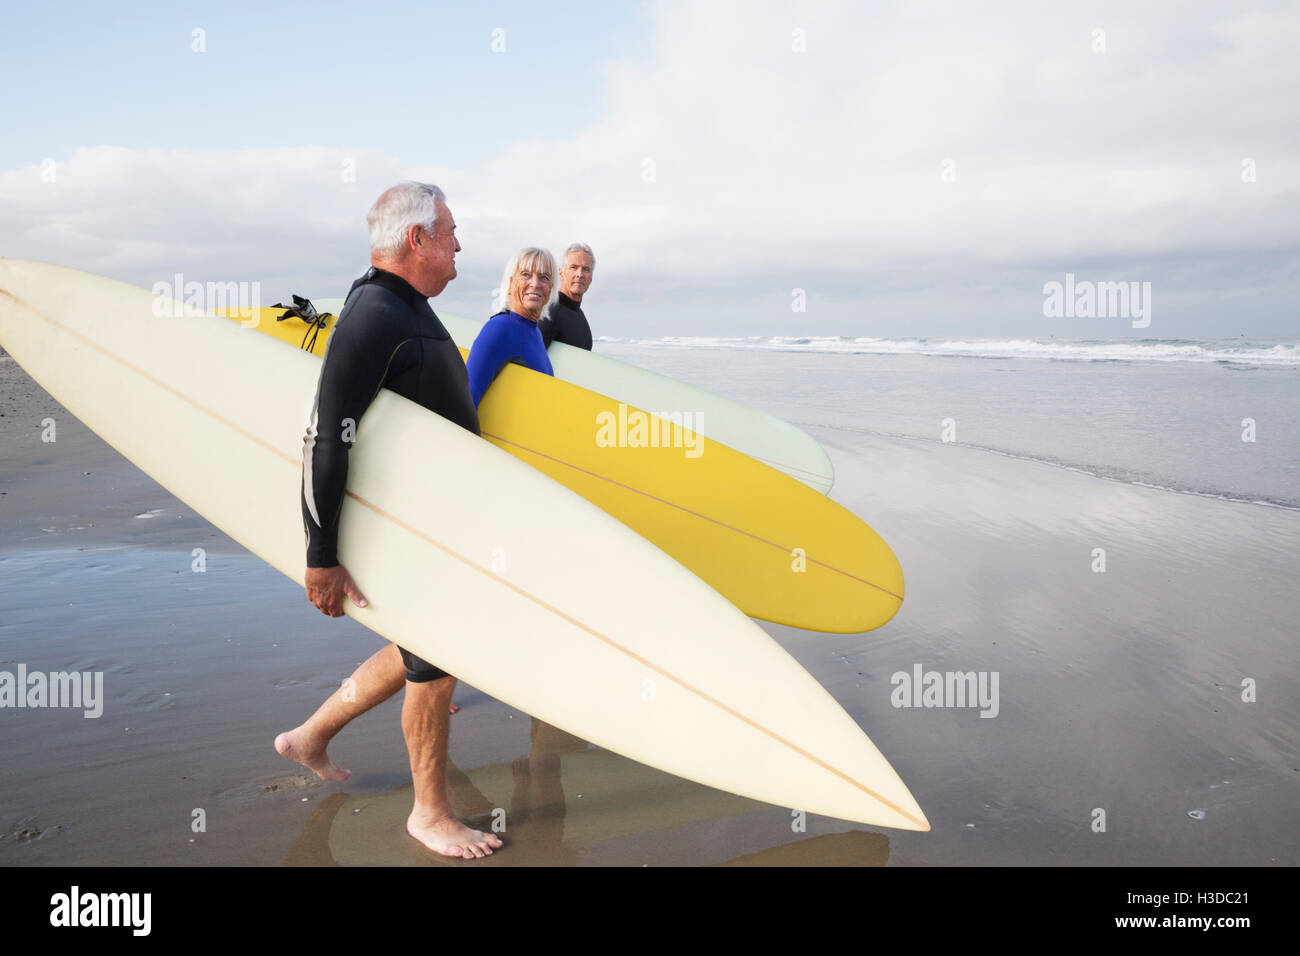 Senior woman and two senior men on a beach, wearing wetsuits and carrying surfboards. Stock Photo